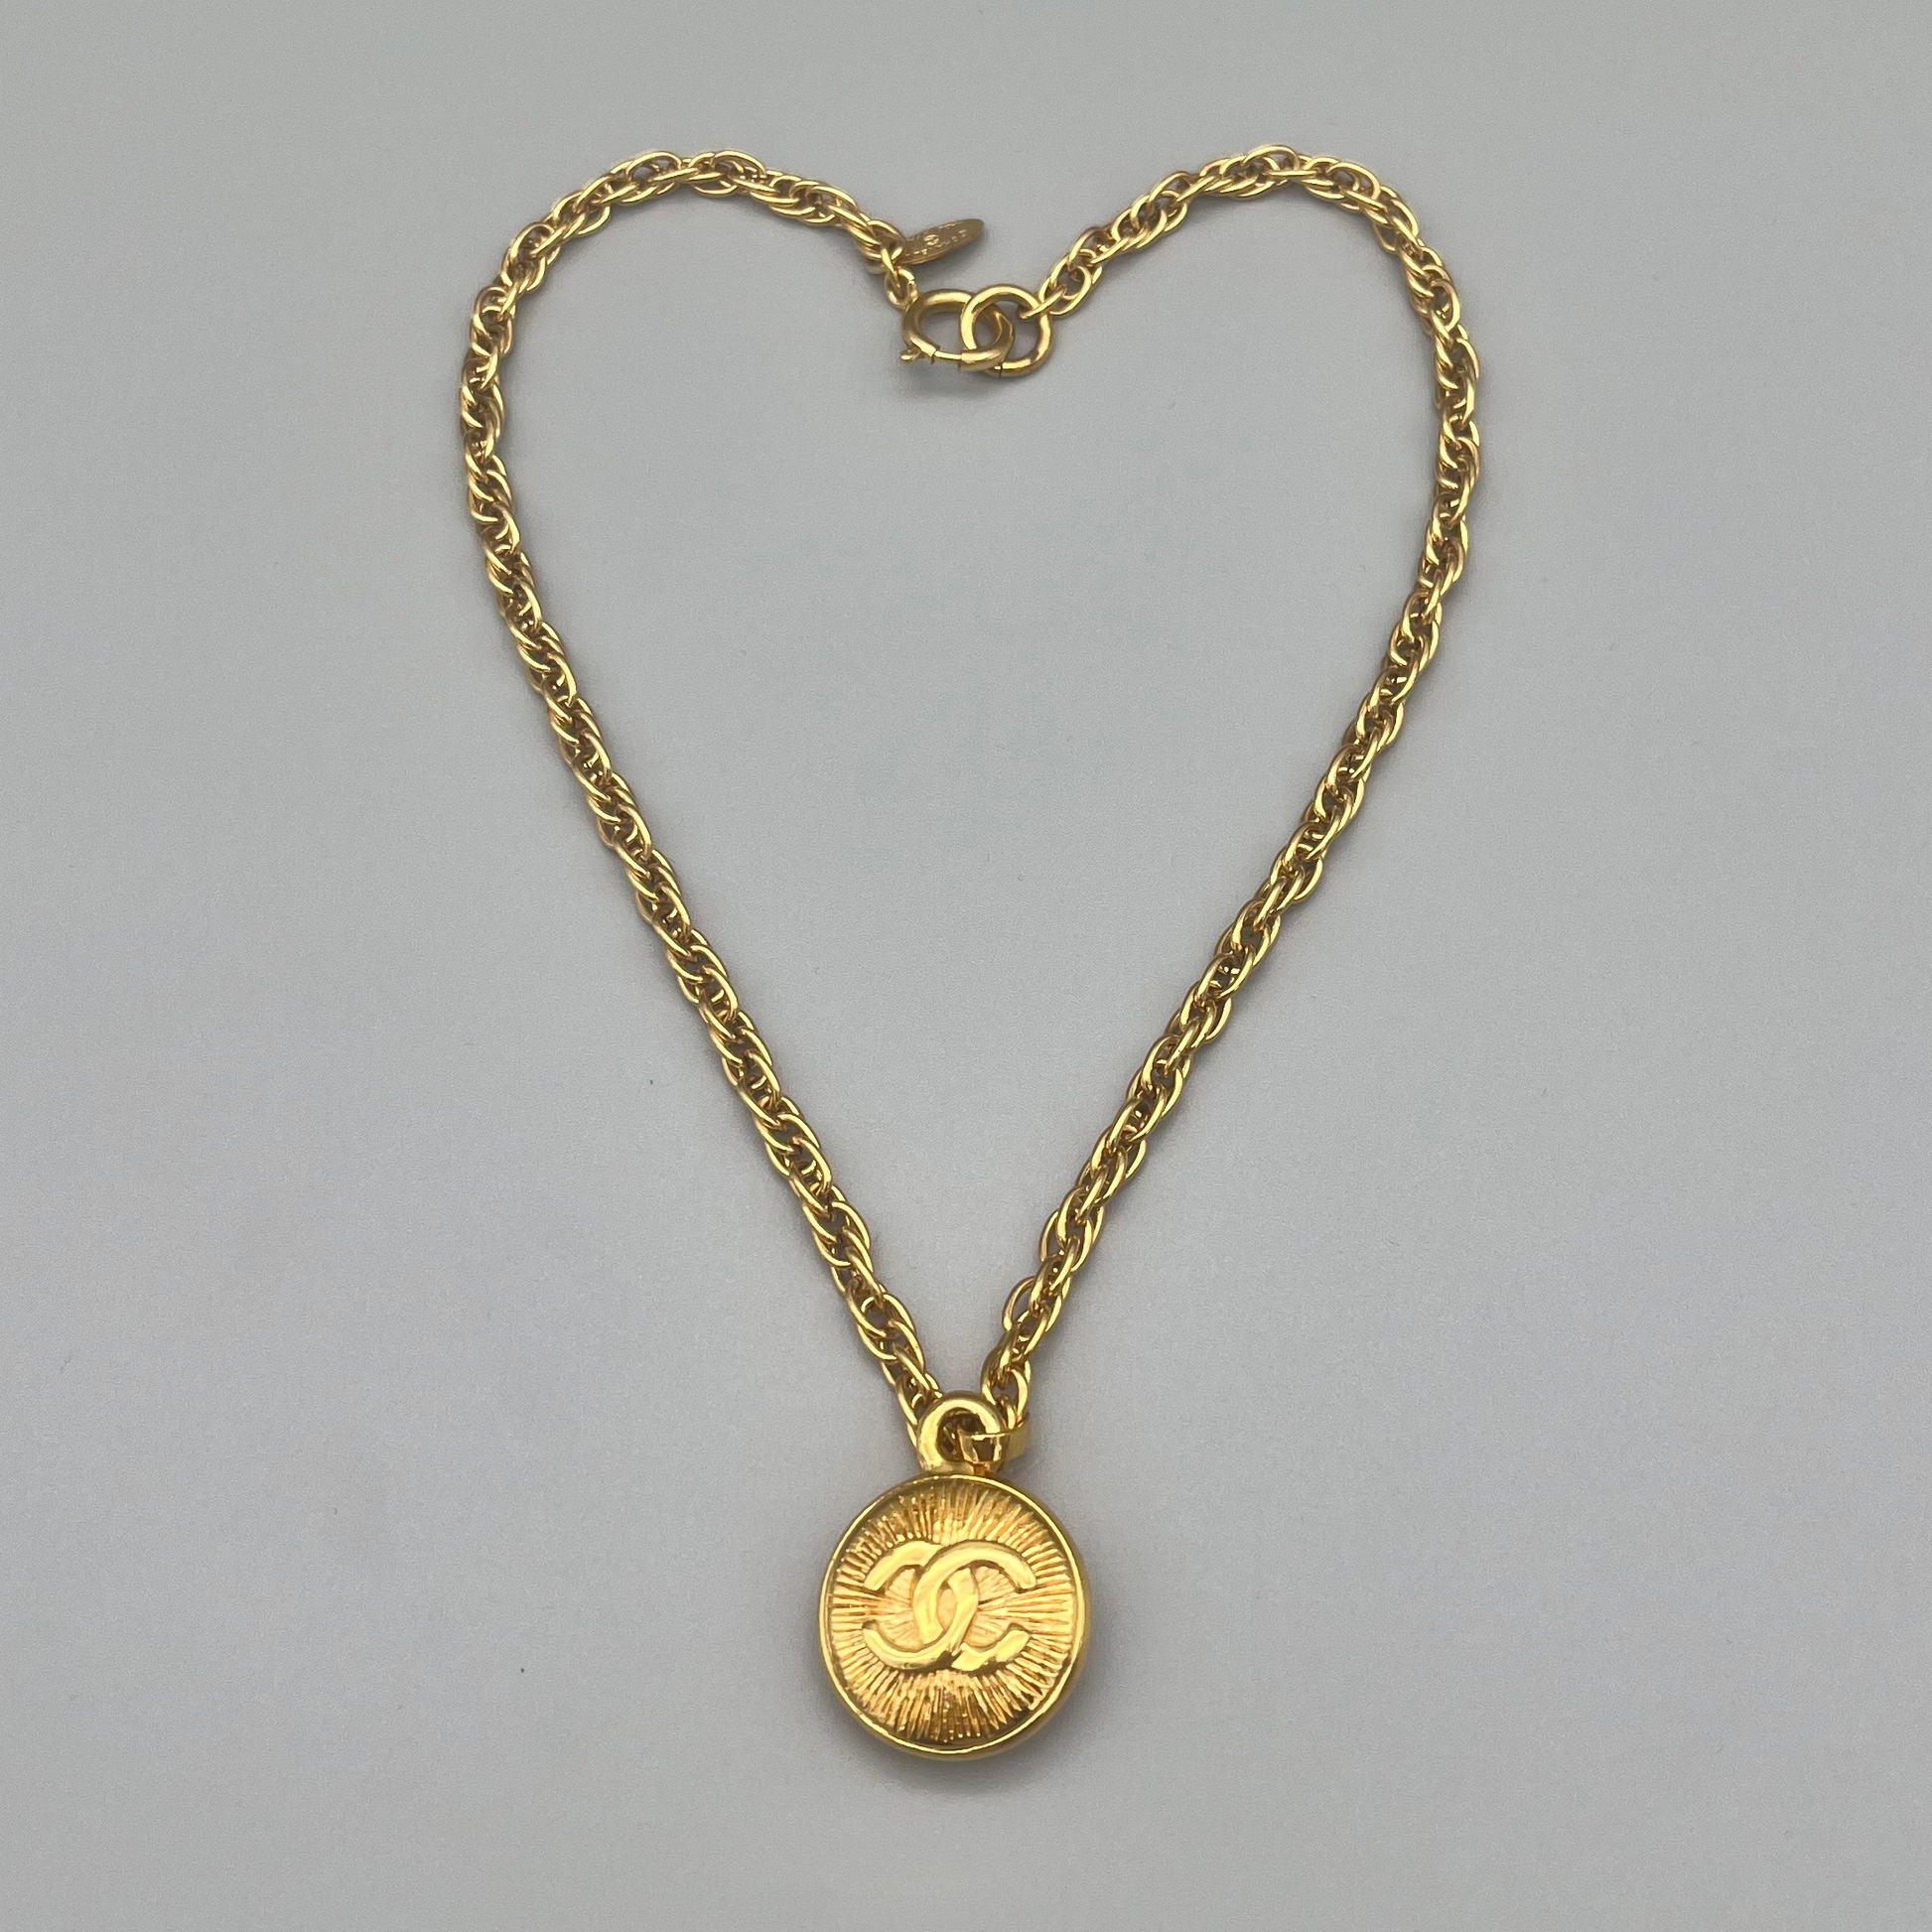 Japan Used Necklace] CHANEL Double Points Necklace Gp Coco Mark